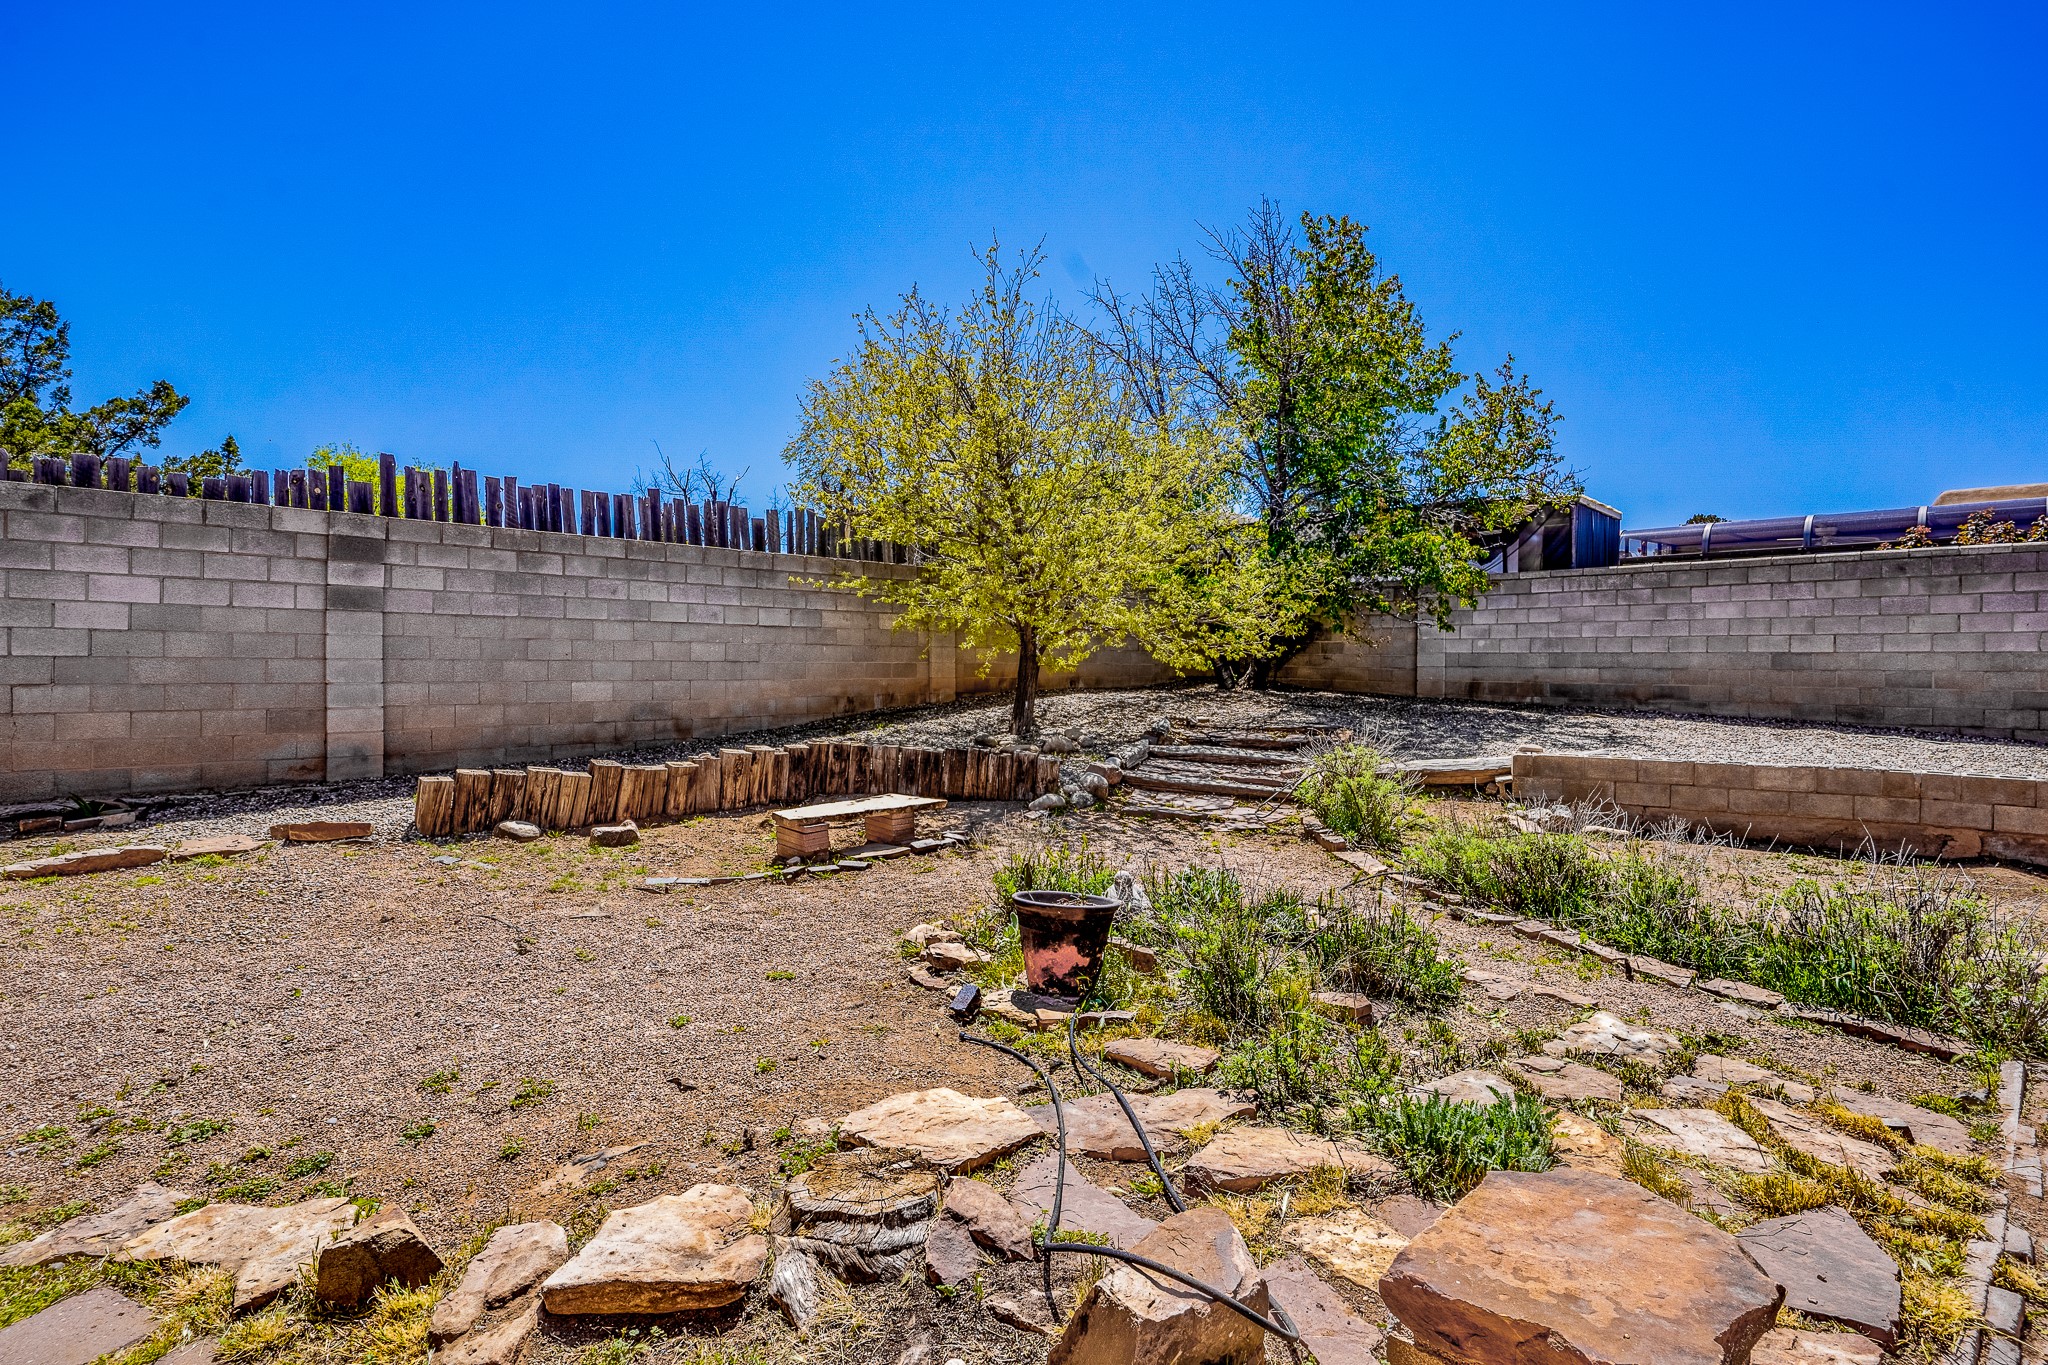 2075 Fifth Street, Santa Fe, New Mexico 87505, 3 Bedrooms Bedrooms, ,2 BathroomsBathrooms,Residential,For Sale,2075 Fifth Street,202336540